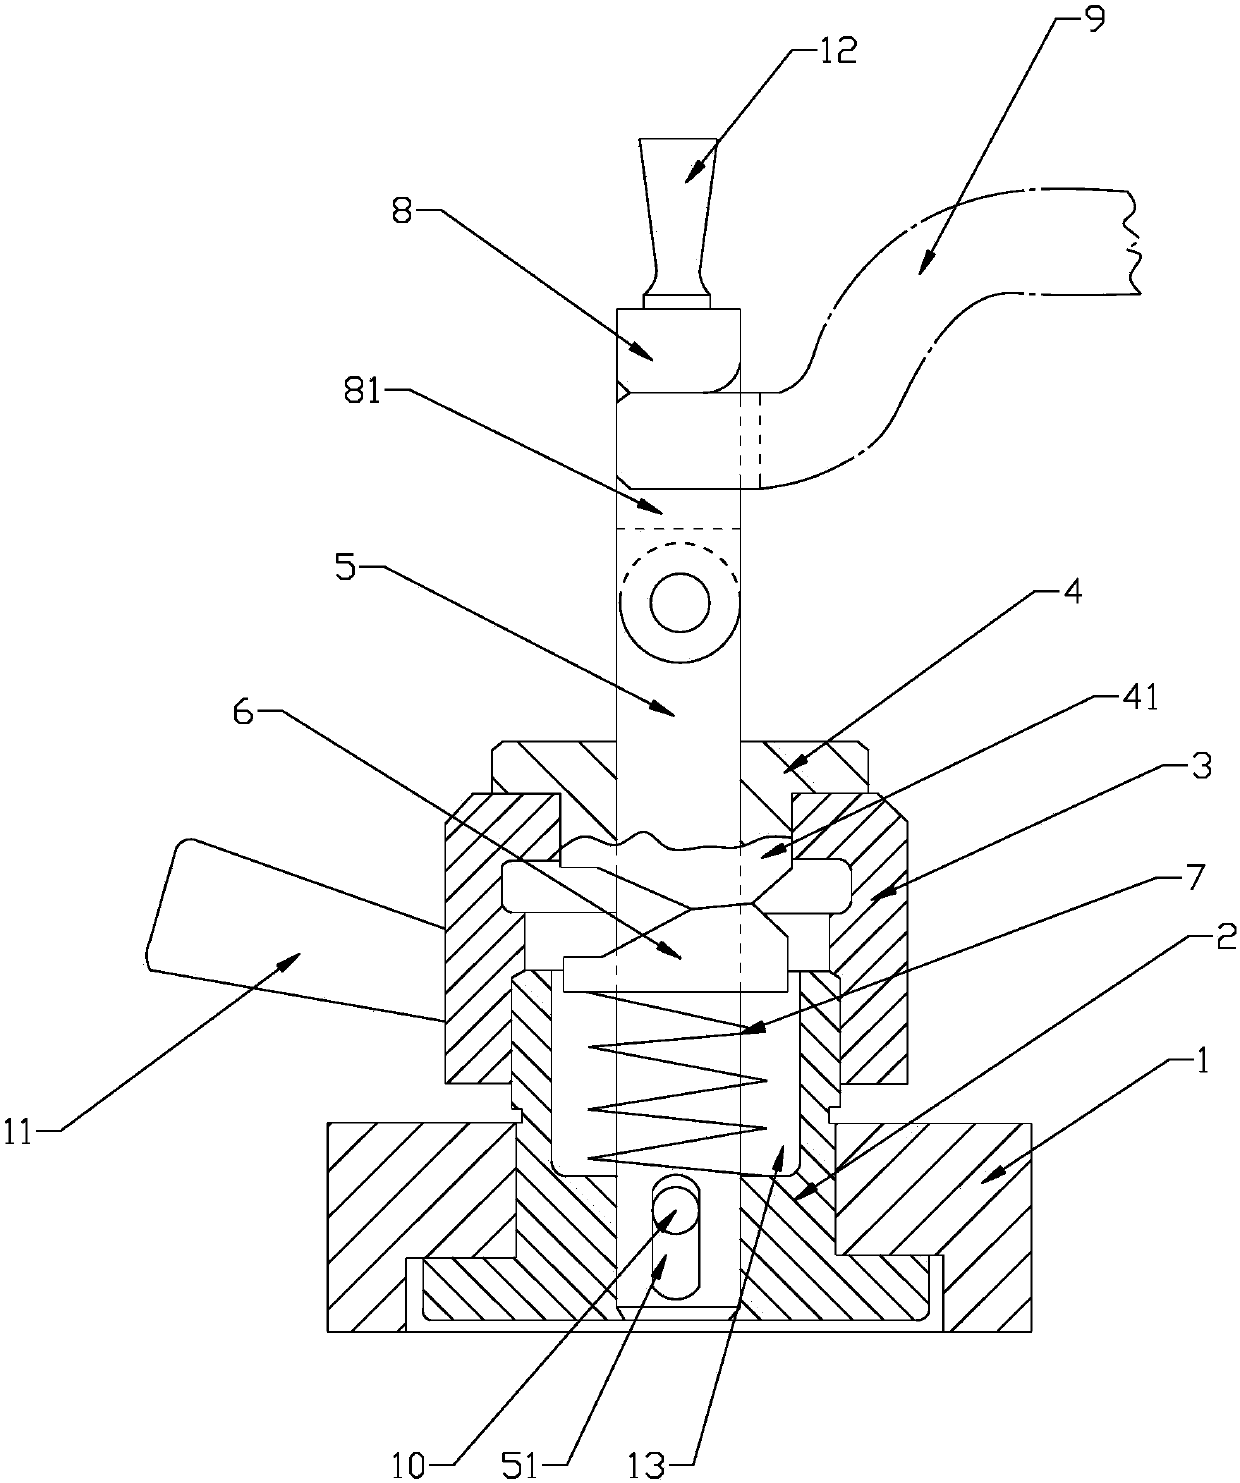 Cover body positioning and clamping device